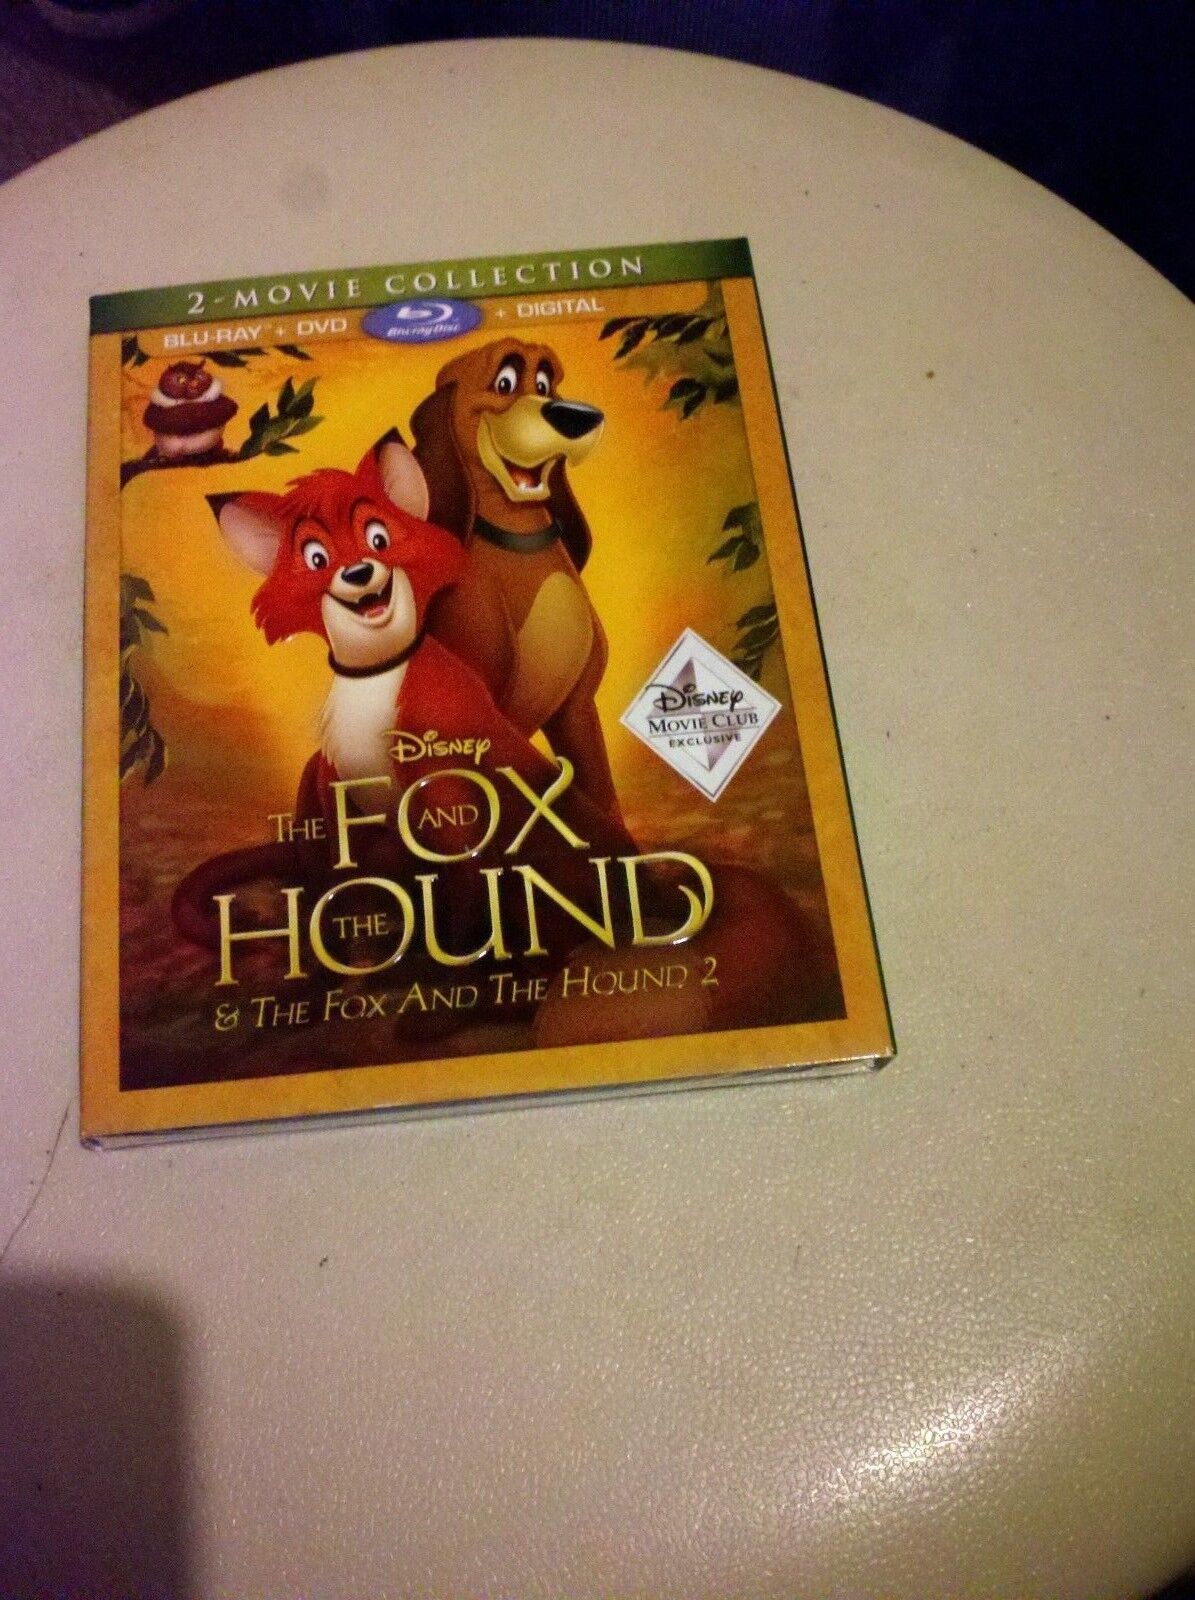 Primary image for The Fox and the Hound/F&H 2 (2018)--DVD Only (2-Movie Collection) [READ LISTING]